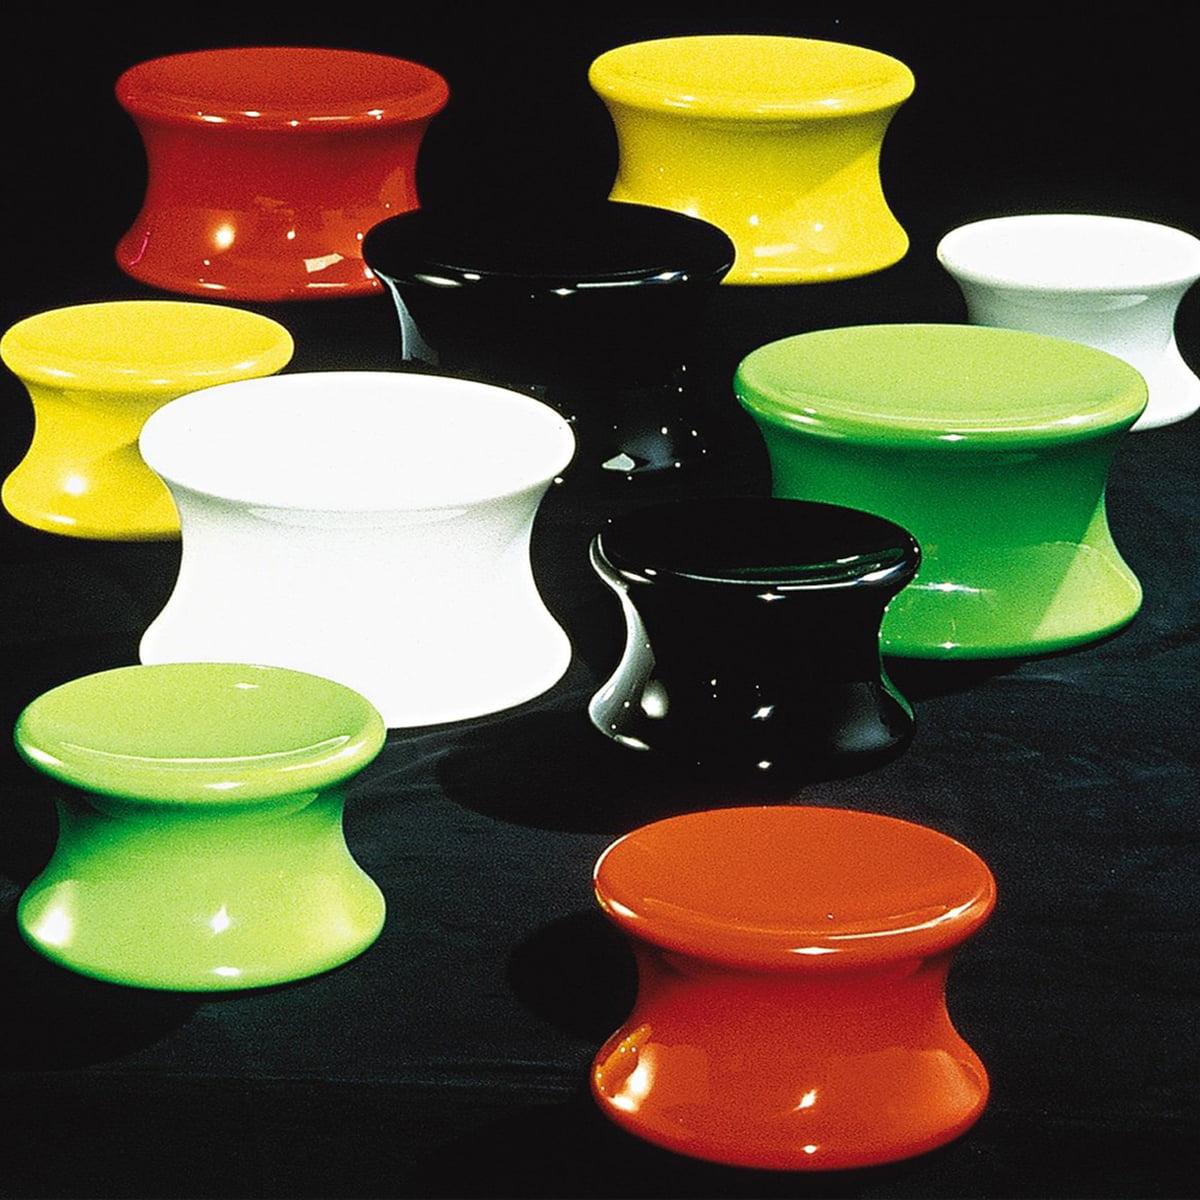 He mushroom is one of Eero’s oldest designs and in its fibreglass form is part of the same design family that includes the ball chair, Pastil and Tomato. It can be used as a stool or a small table. The fibreglass mushroom was designed in 1967 by